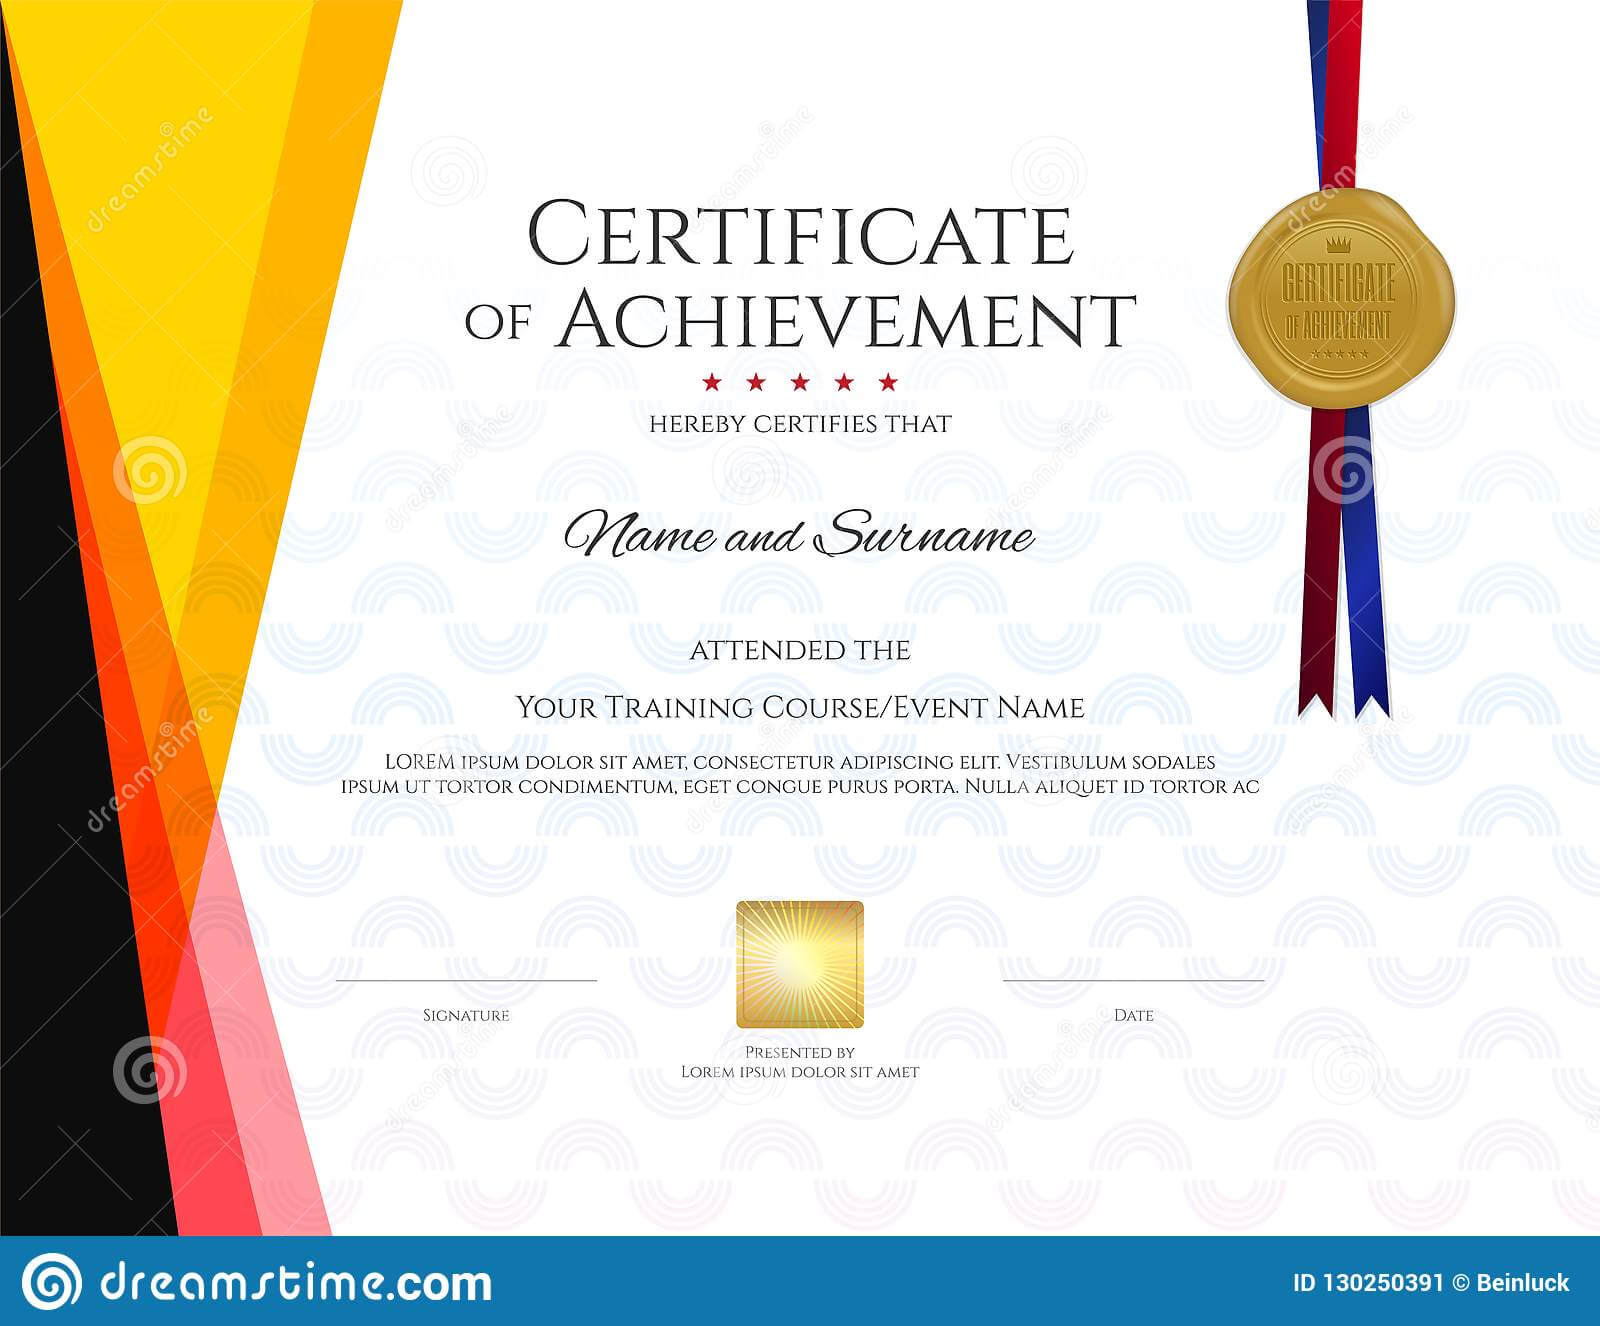 Modern Certificate Template With Elegant Border Frame Pertaining To Certificate Border Design Templates